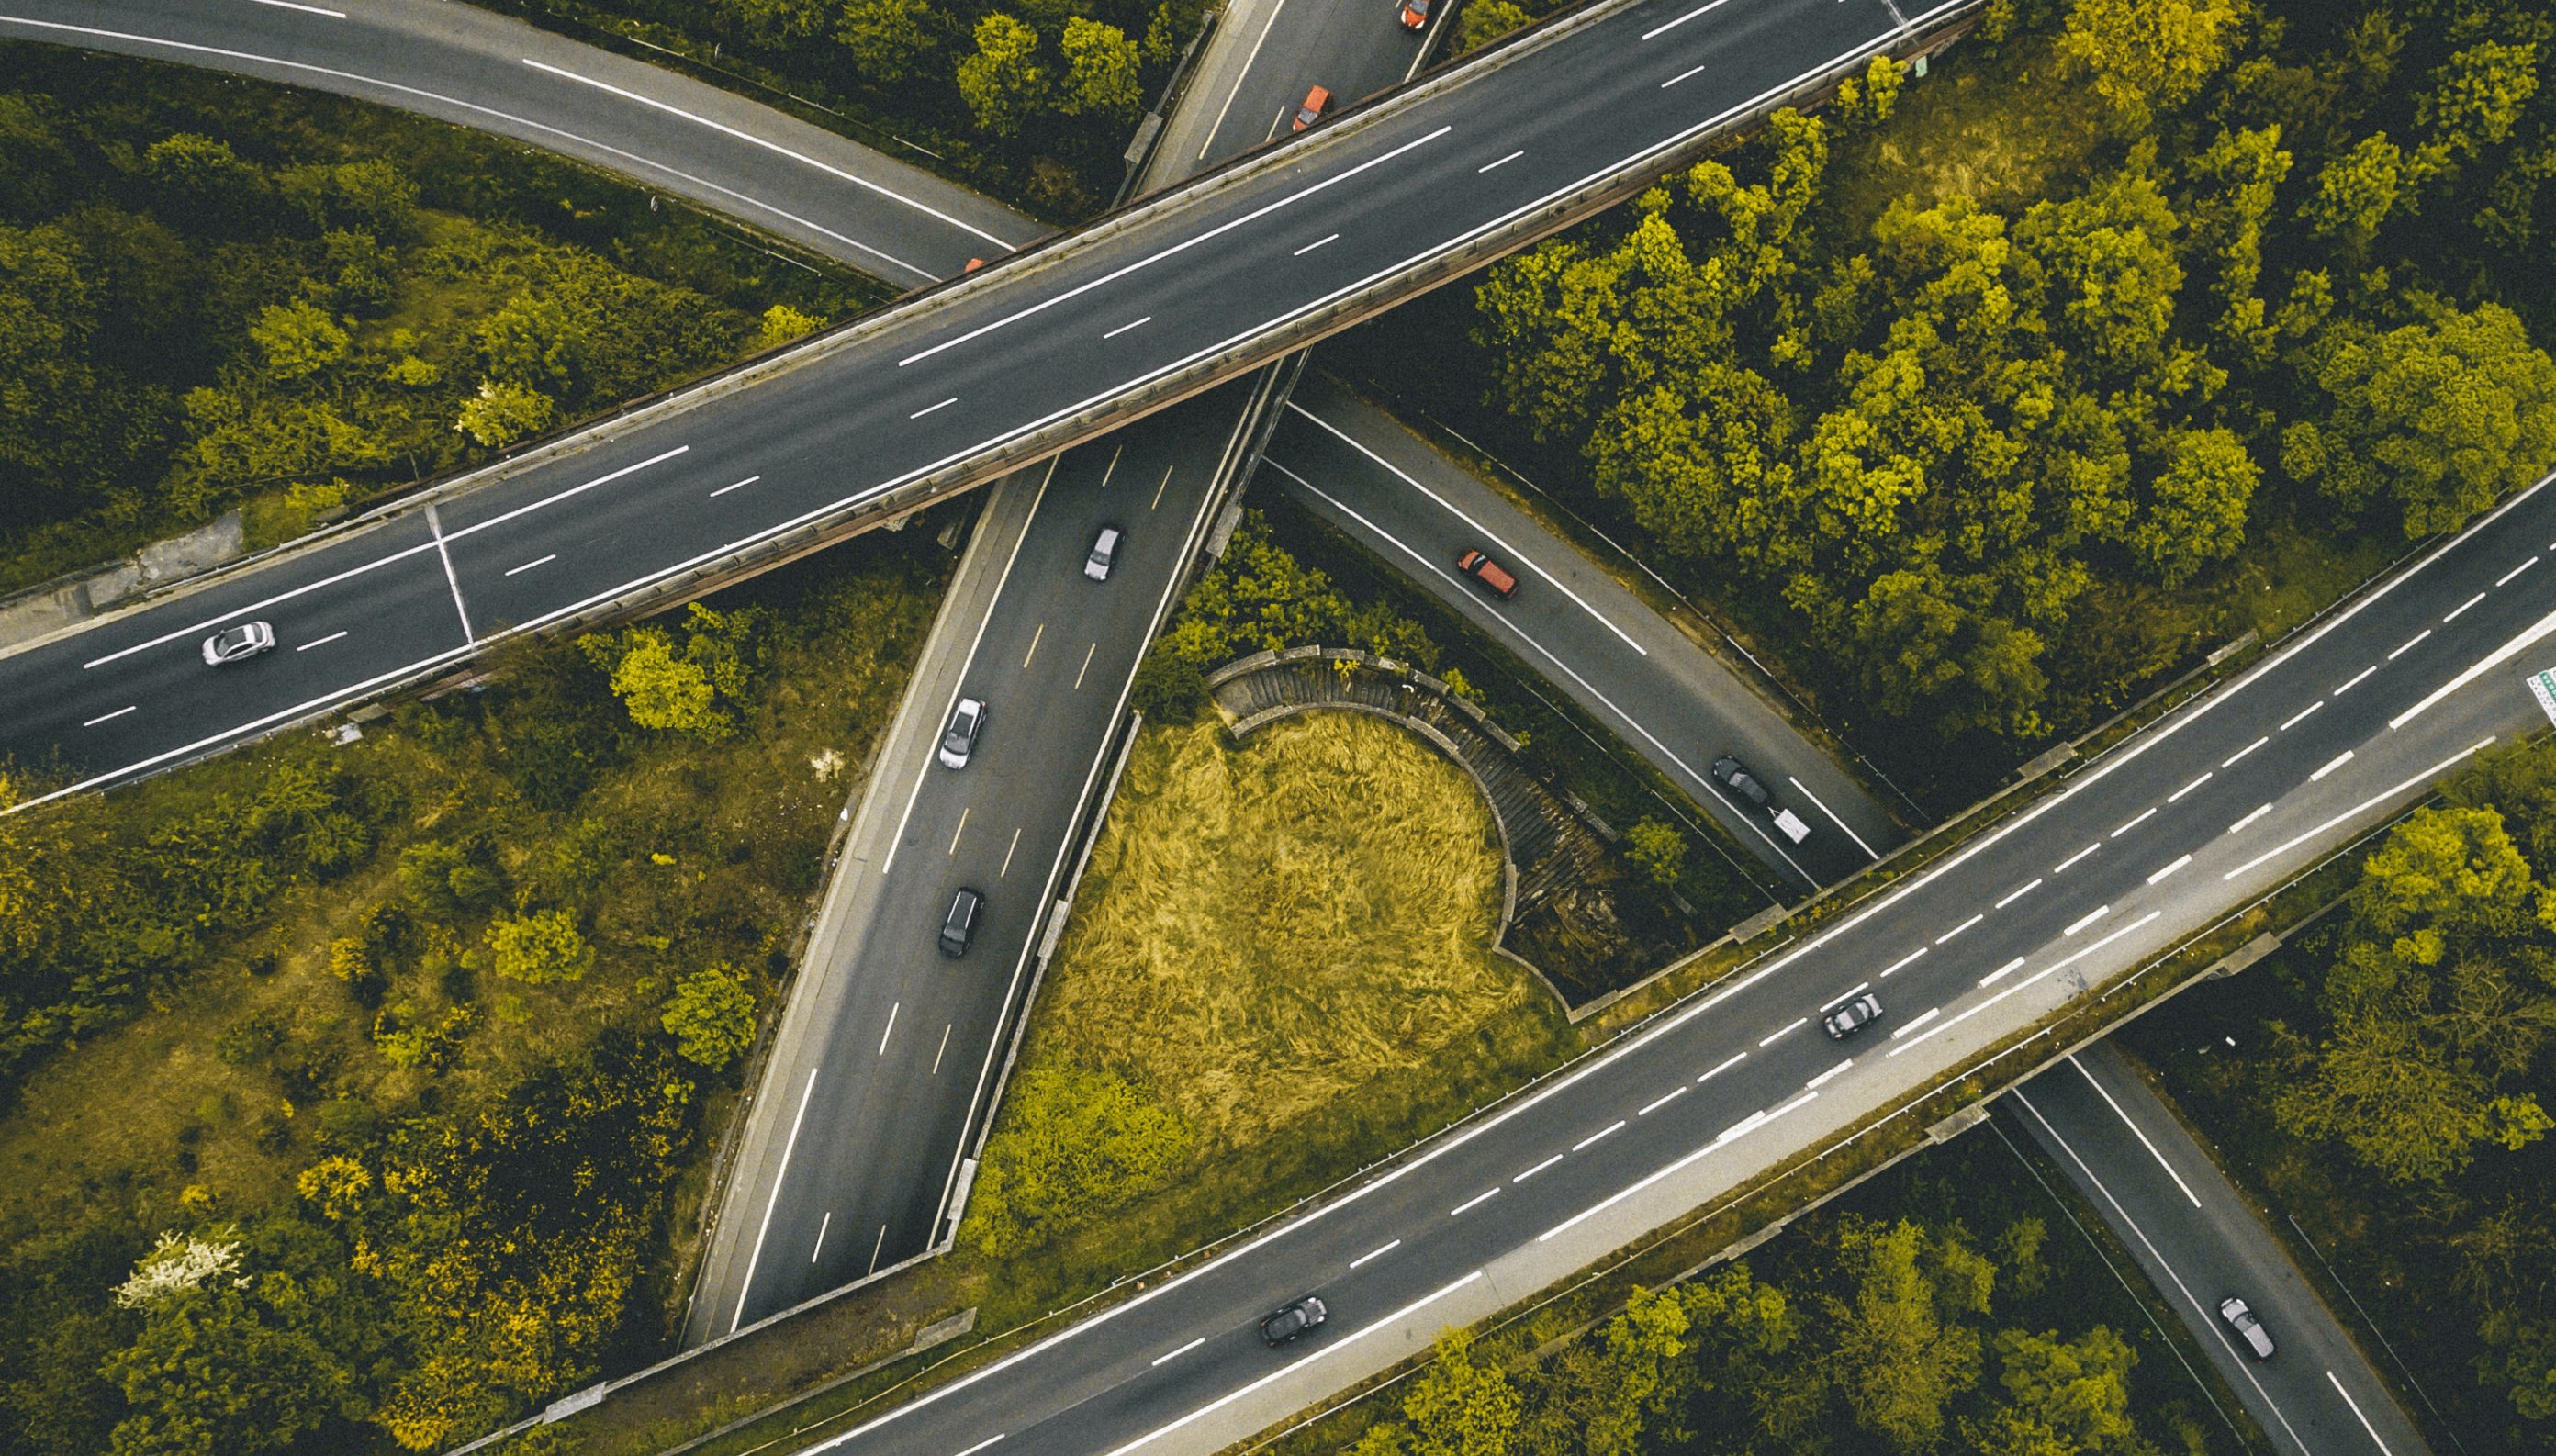 Aerial image of highway with cars driving and trees surrounding it